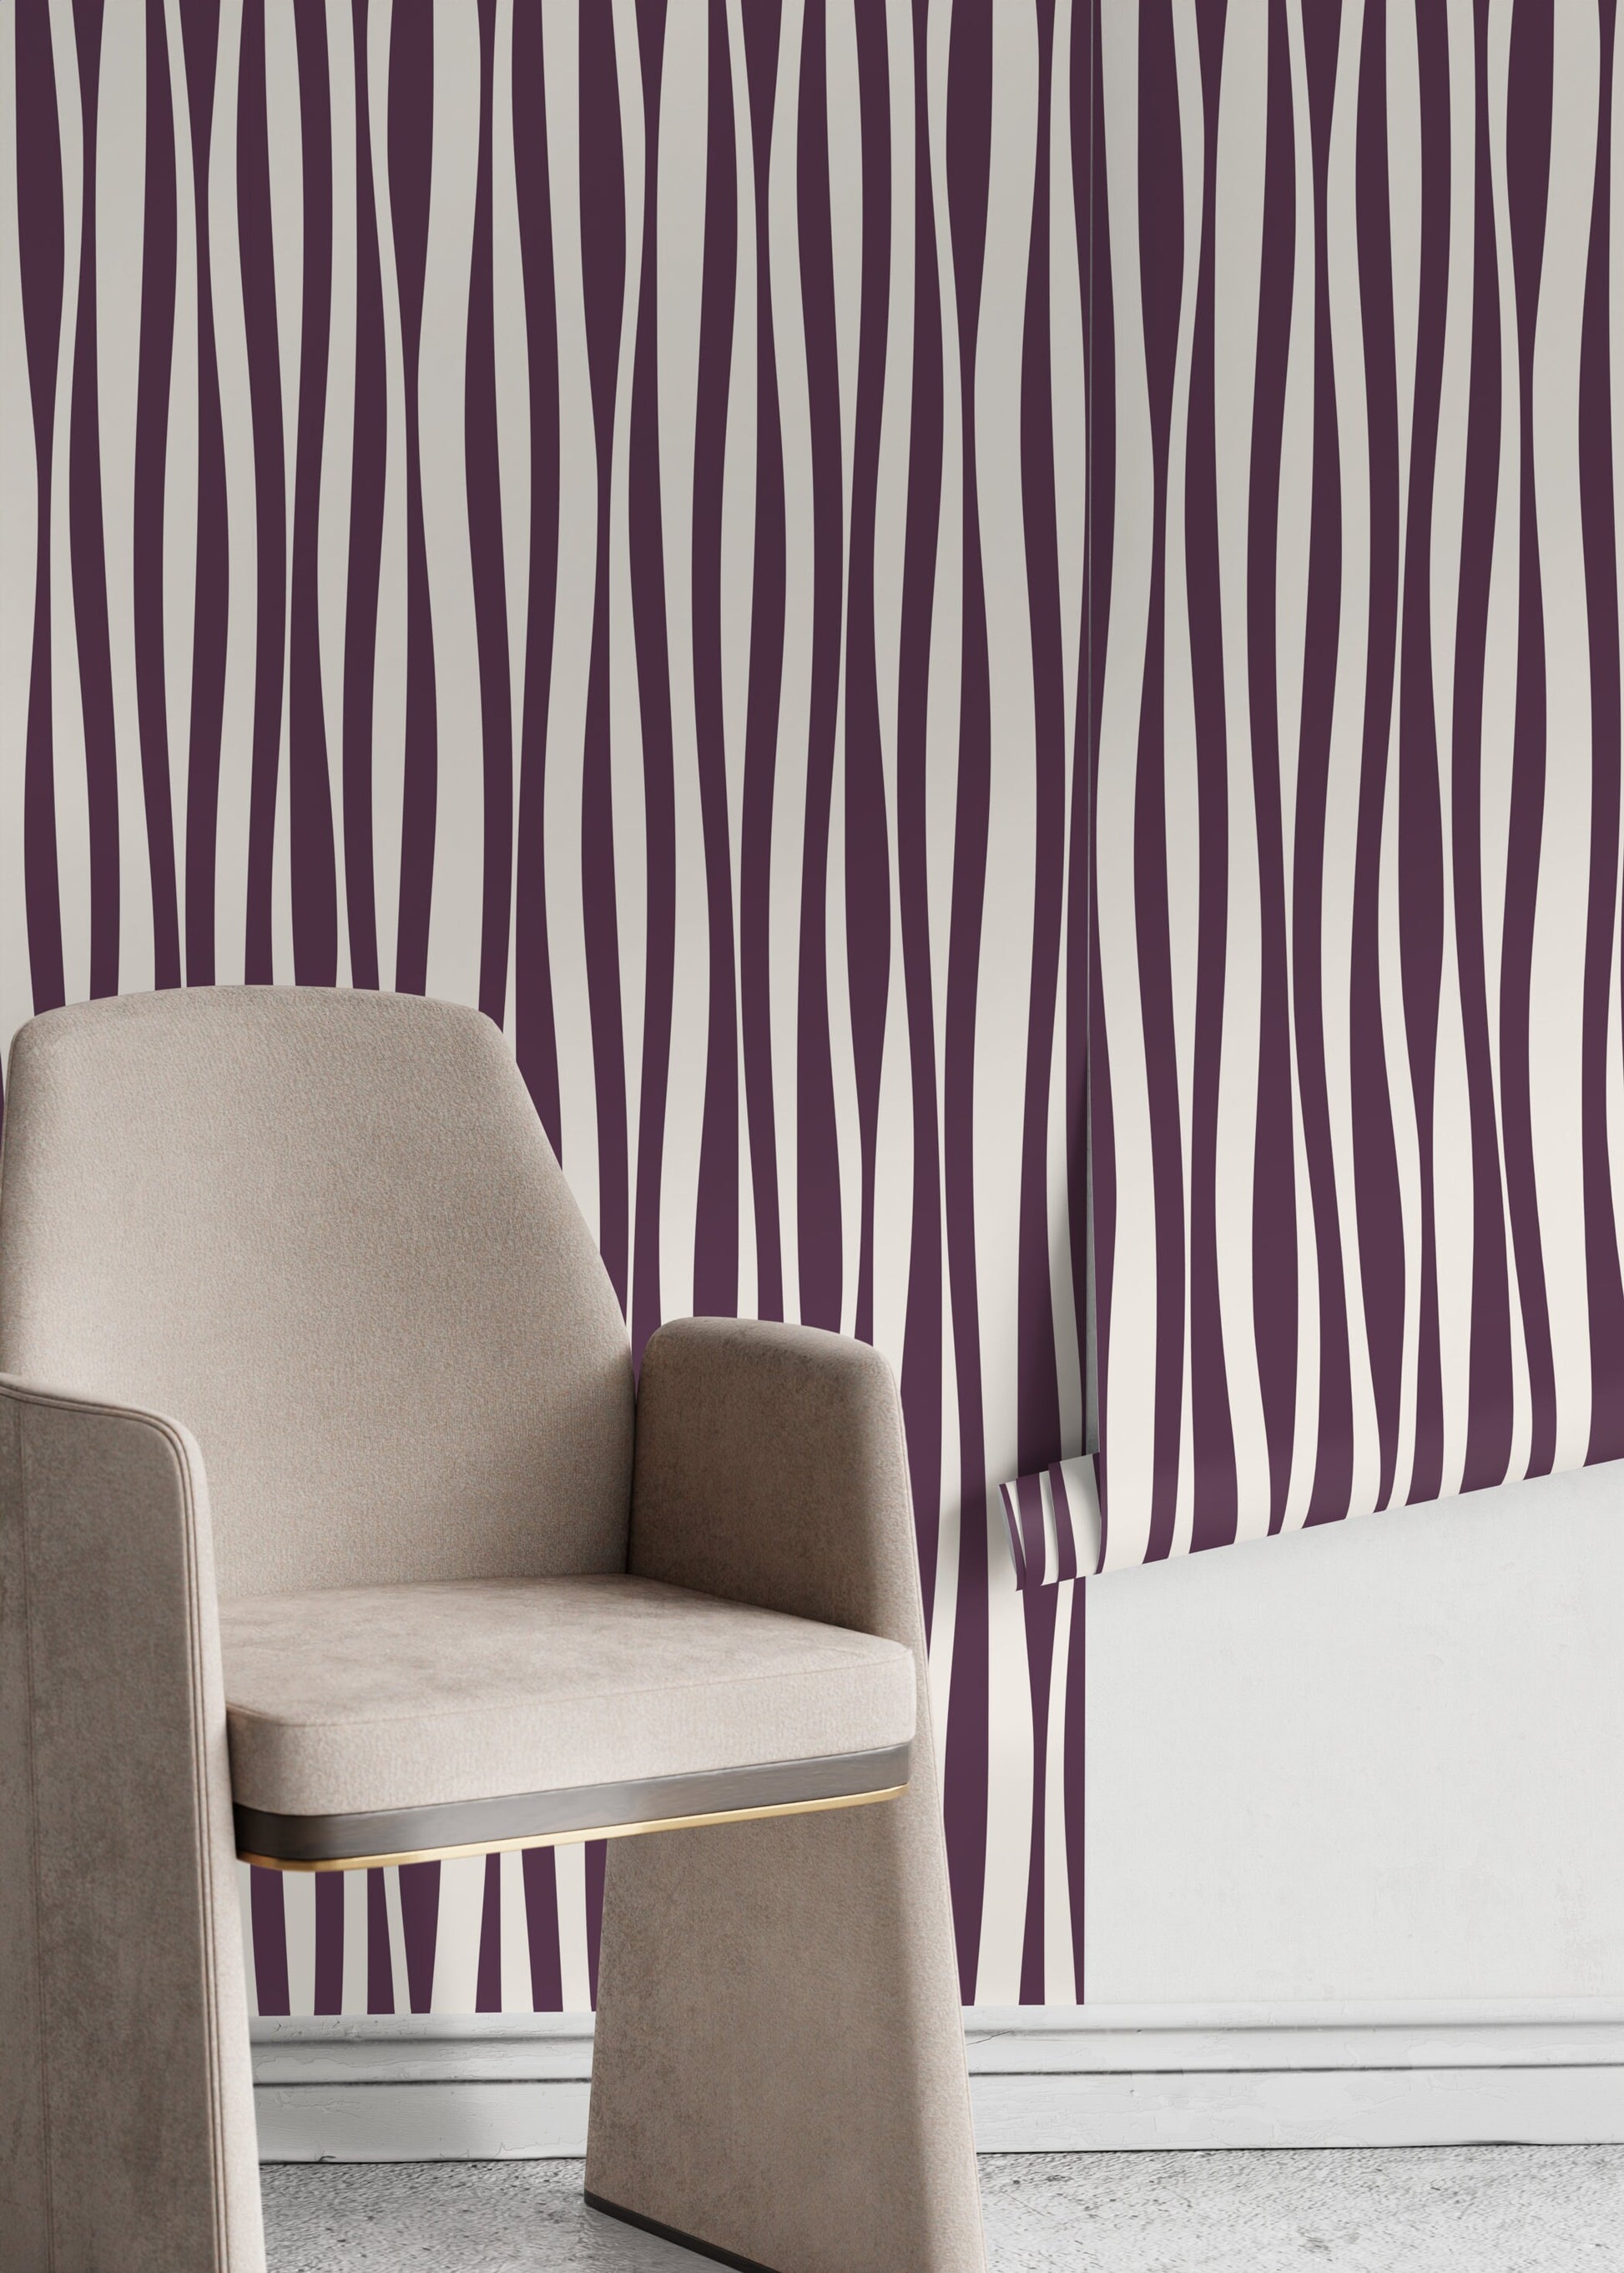 Purple Abstract Striped Wallpaper / Peel and Stick Wallpaper Removable Wallpaper Home Decor Wall Art Wall Decor Room Decor - D485